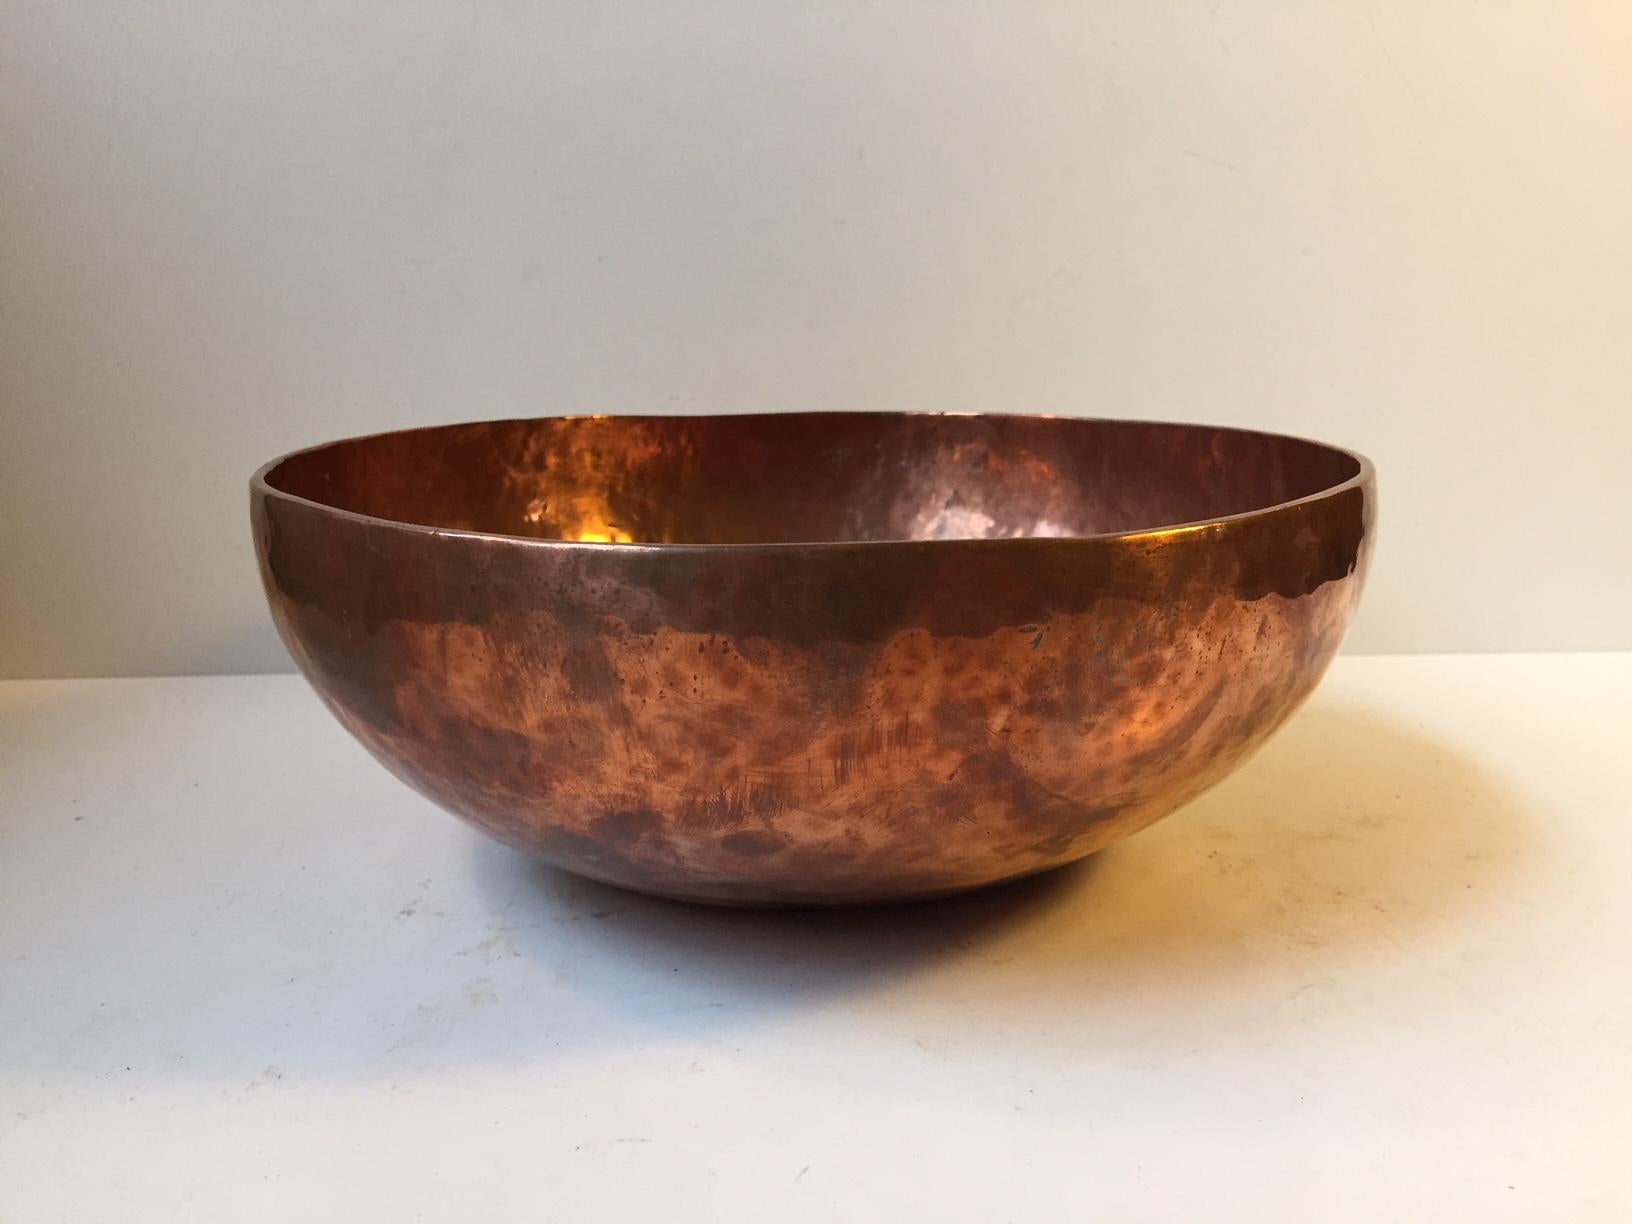 Large hand-hammered Tibetan copper bowl. It is called a Chö-pa. A singing bowl with its own unique sound created by hitting it with your knuckle. According to ancient beliefs the sound mimics the sound of the solar-system. It is uses during